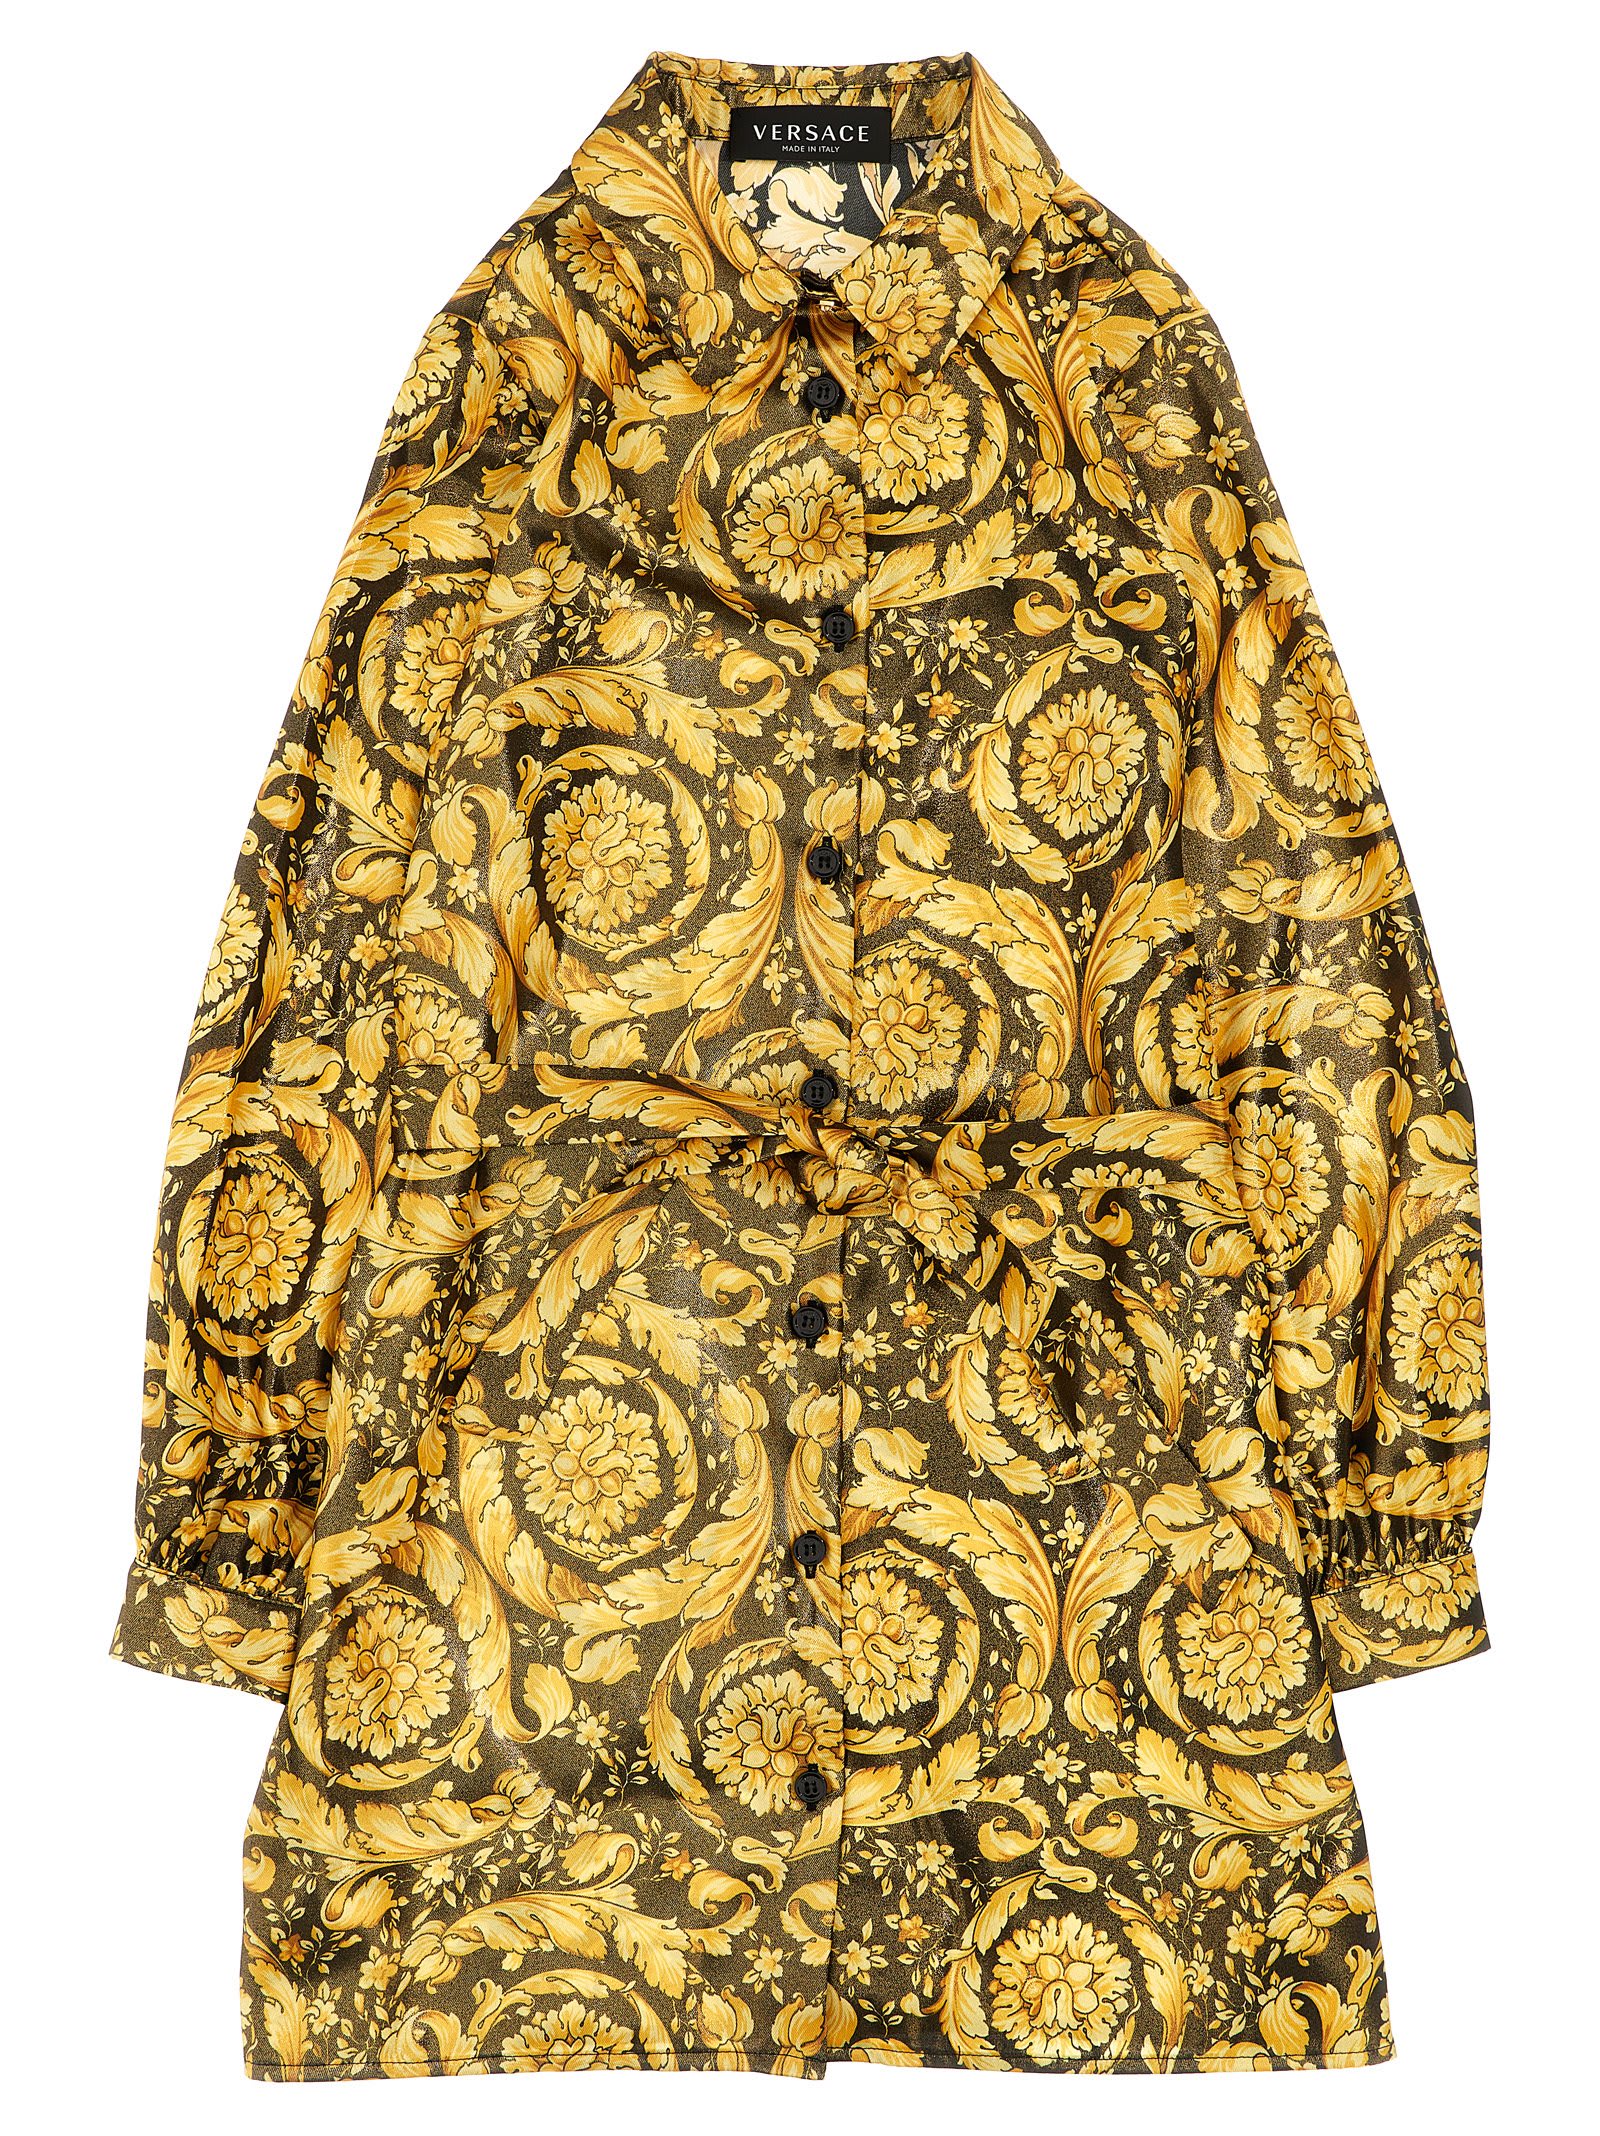 Young Versace Kids' Barocco Dress In Gold